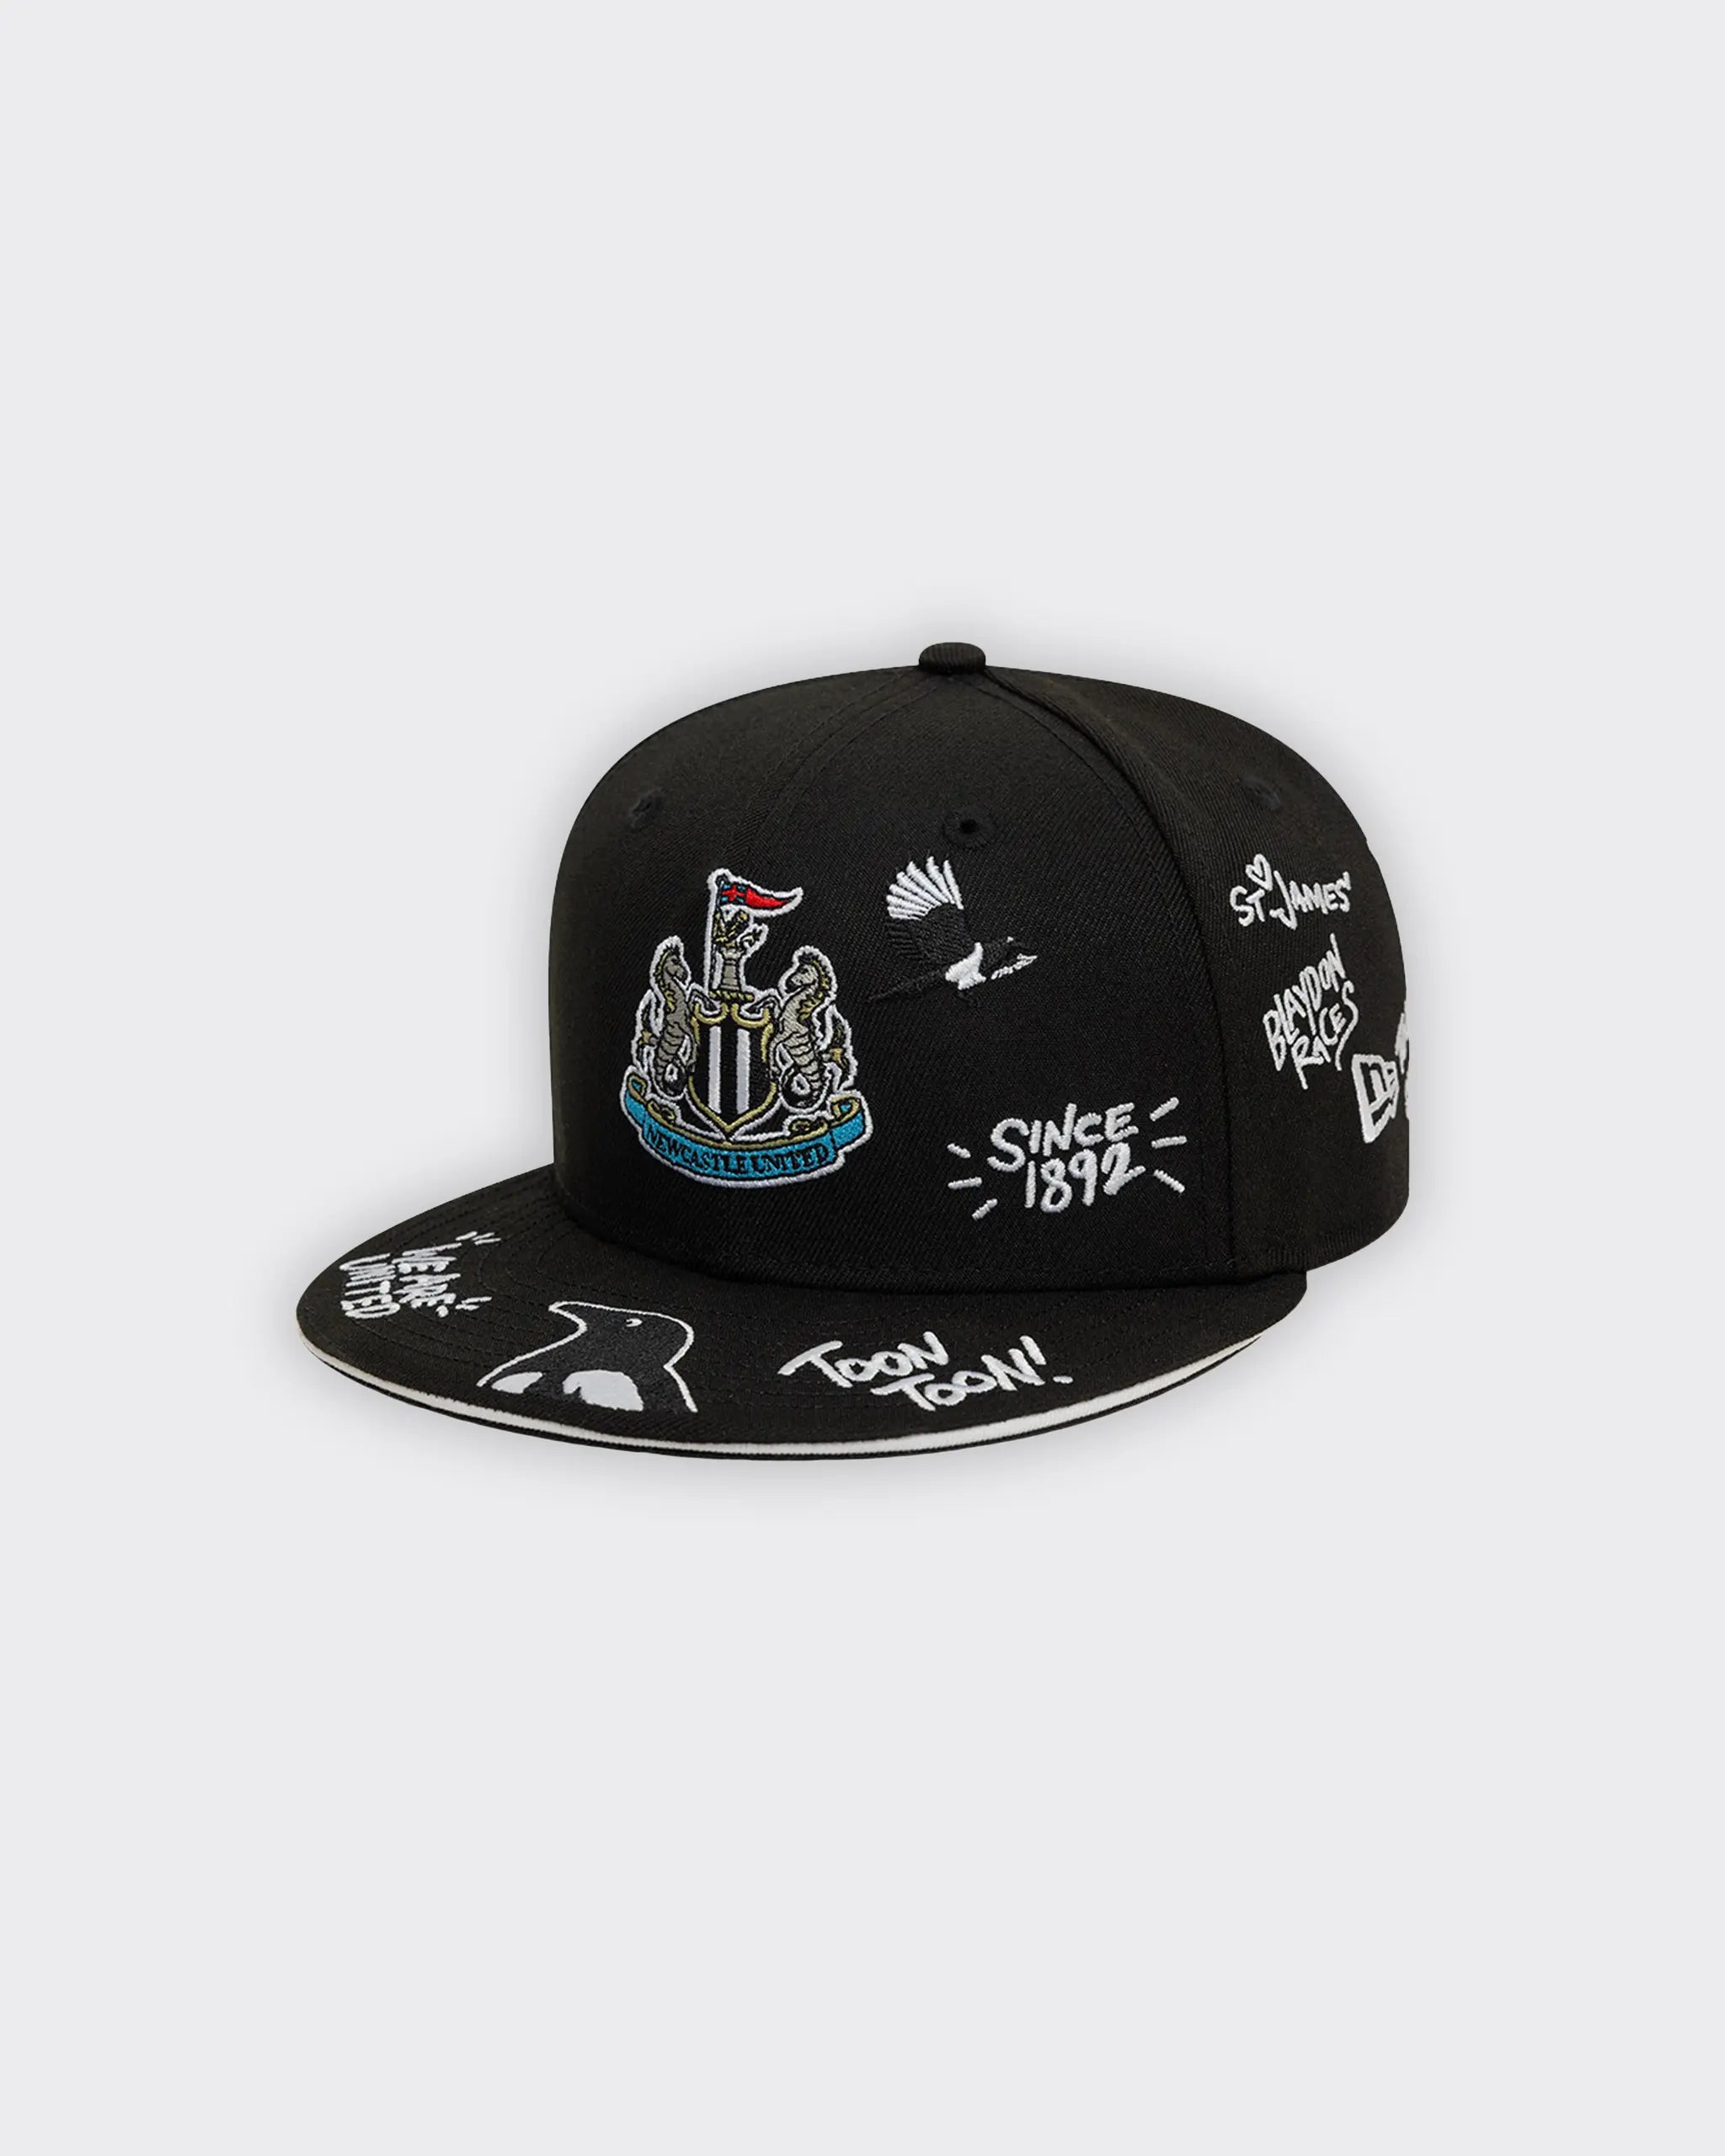 New Era x Newcastle United Limited Edition 59FIFTY